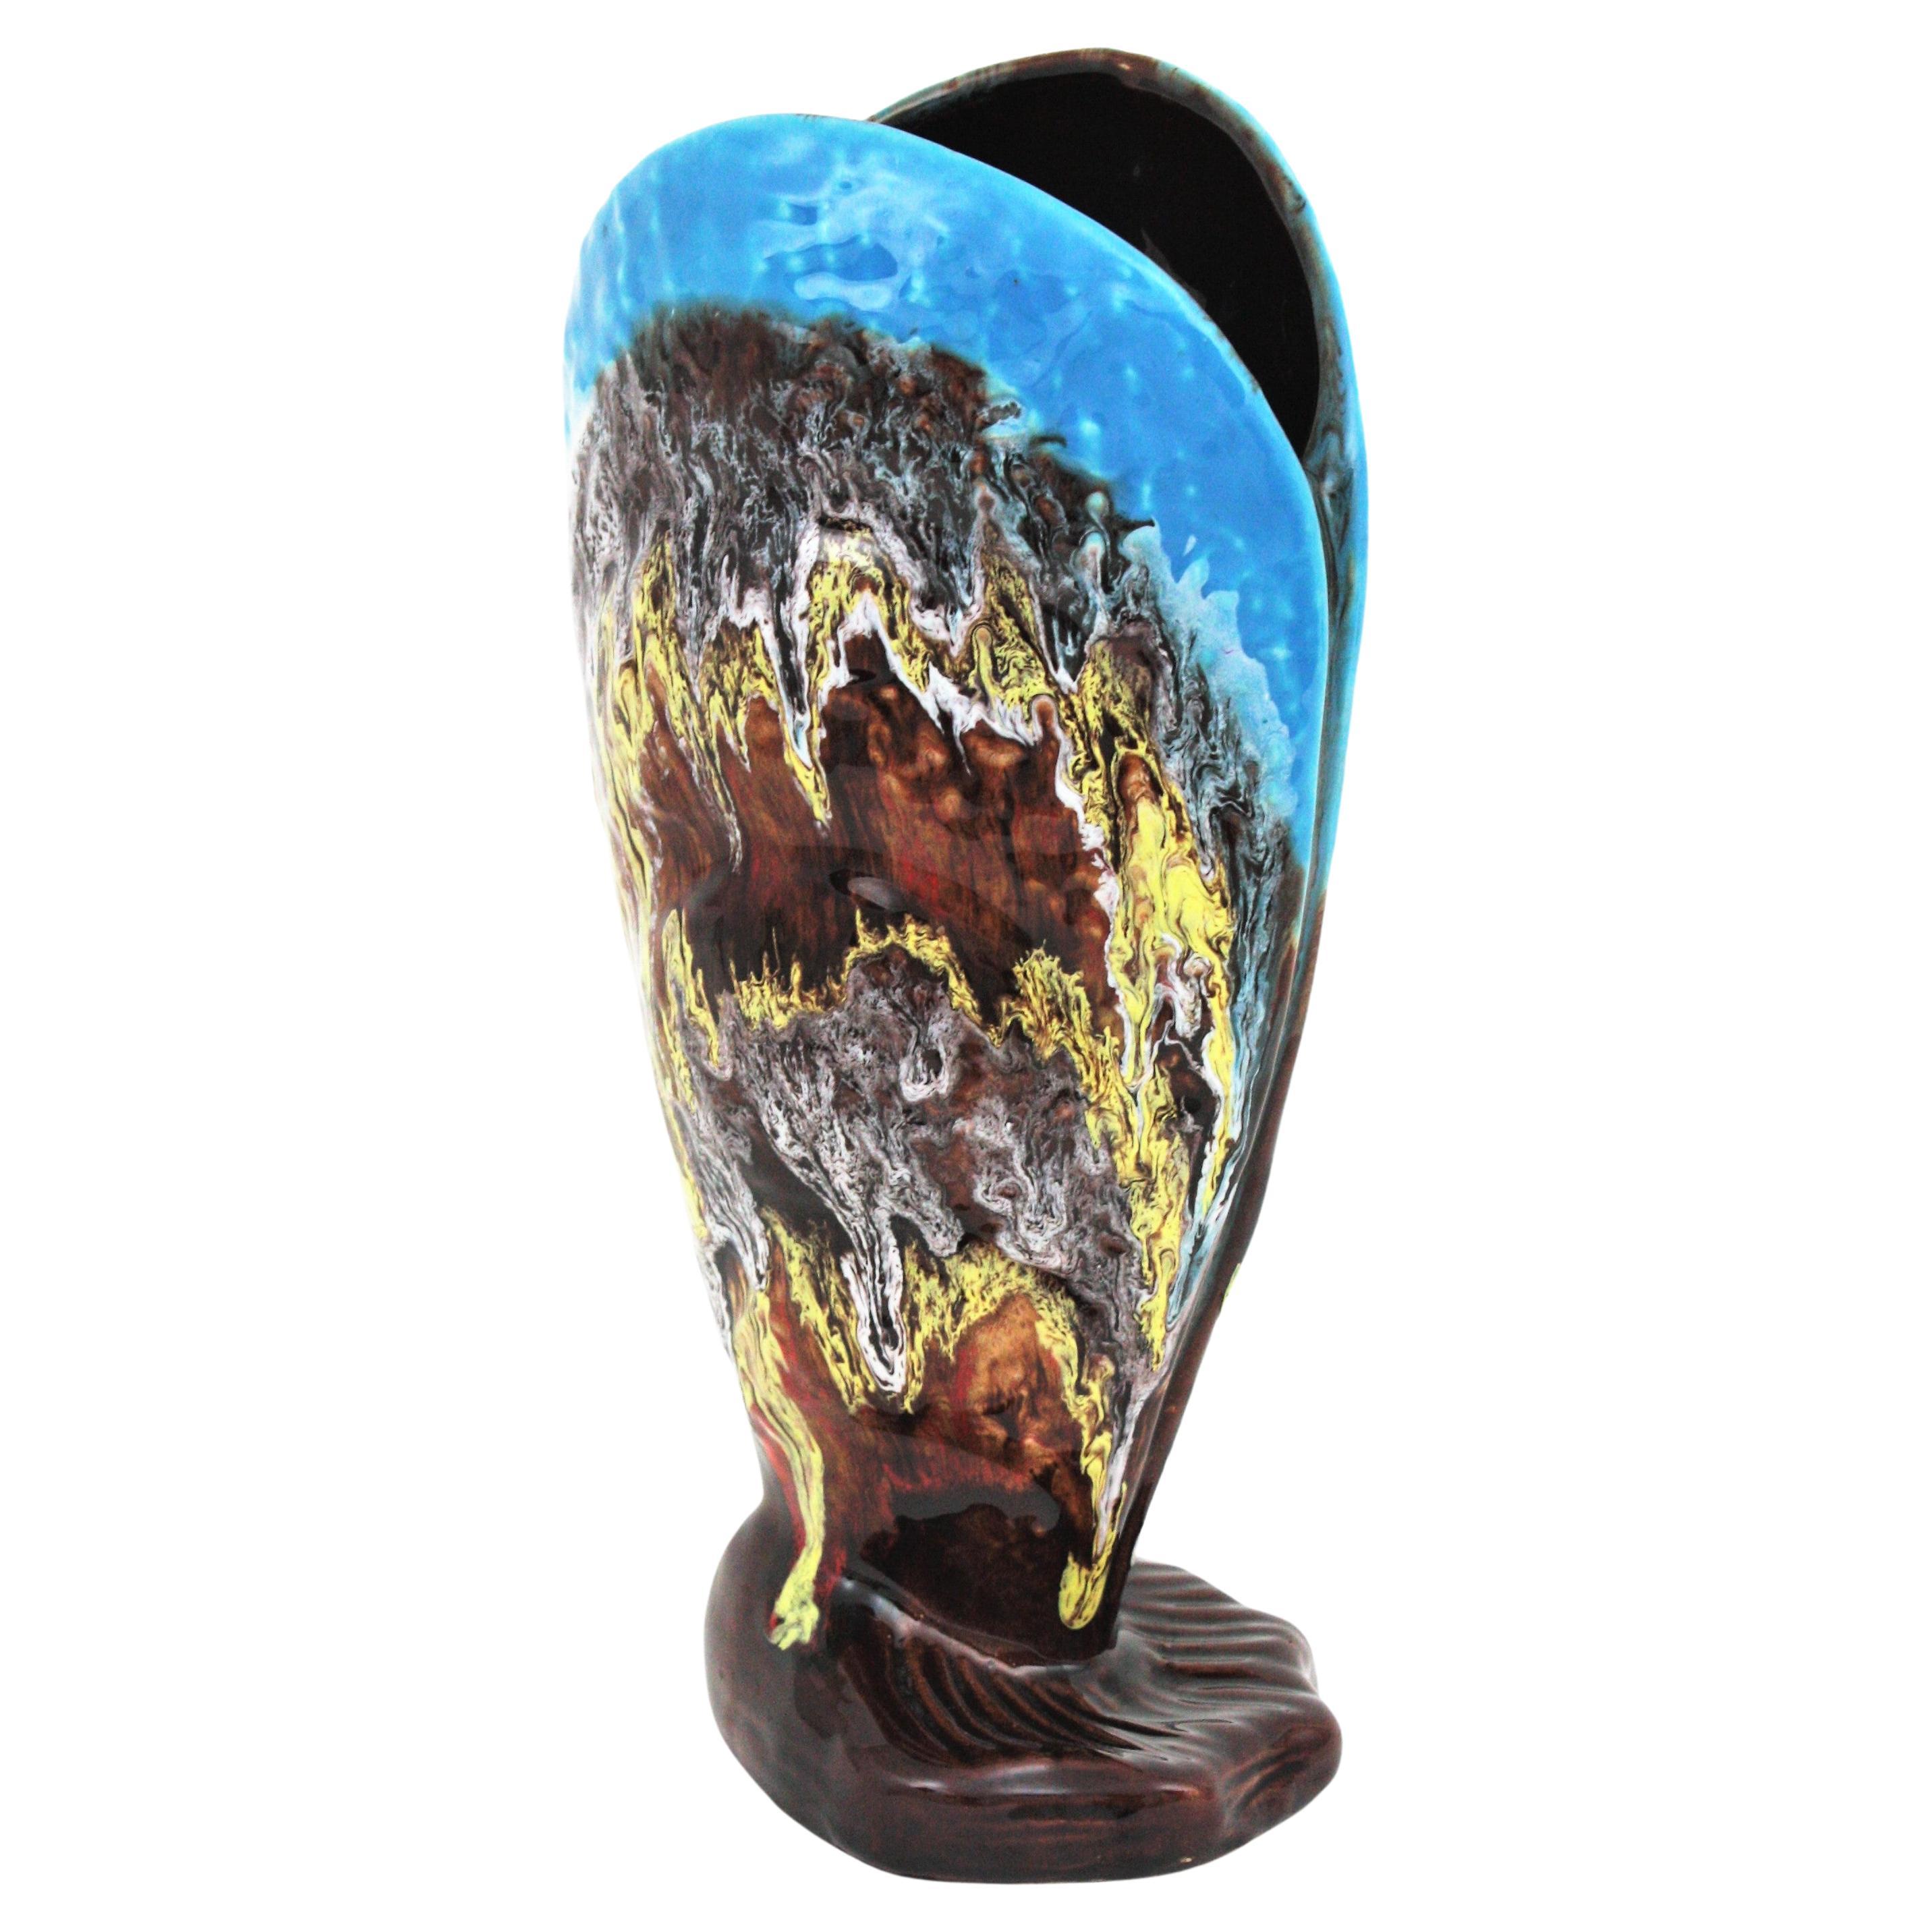 Giant Mid-century Modern Vallauris Ceramid Shell Shaped Vase. France, 1950s-1960s.
Colorful vase with mussel / shell design in glazed ceramic. The exterior part is covered by glazed ceramic in brown color with fat lava decorations in beige, yellow